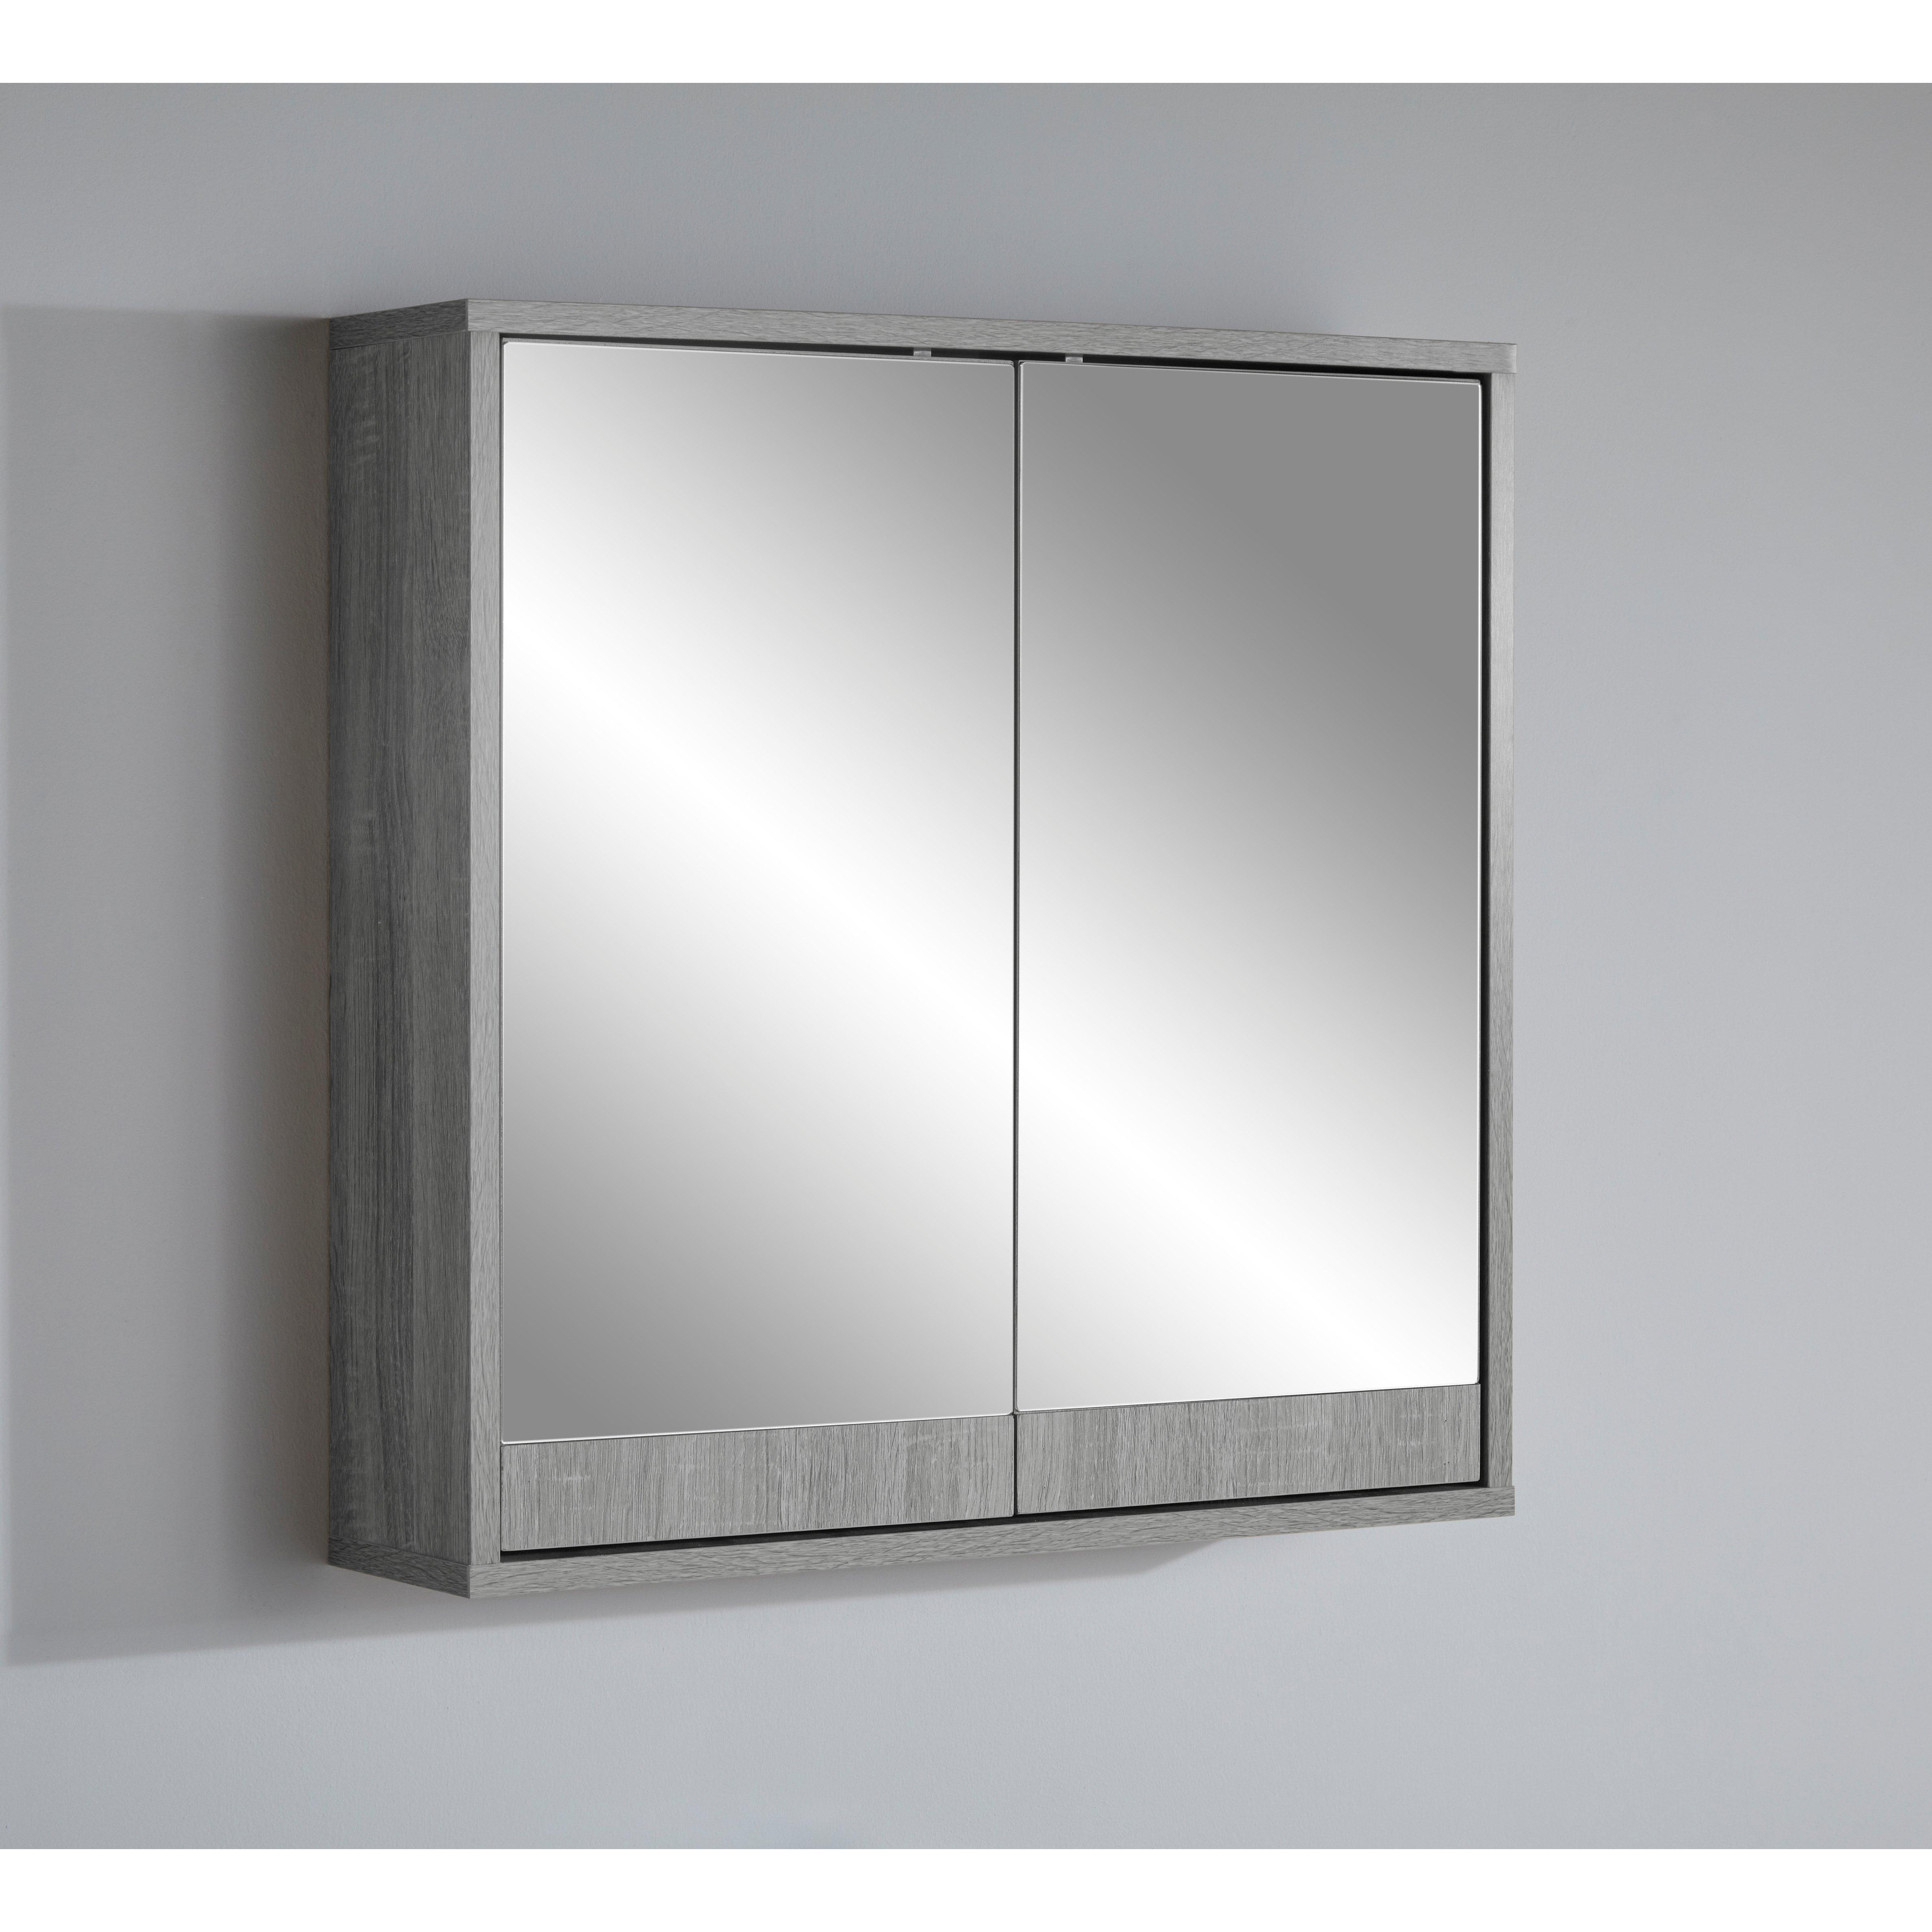 Bathroom Mirrored Wood Effect Wall Mounted Storage Cabinet - image 1